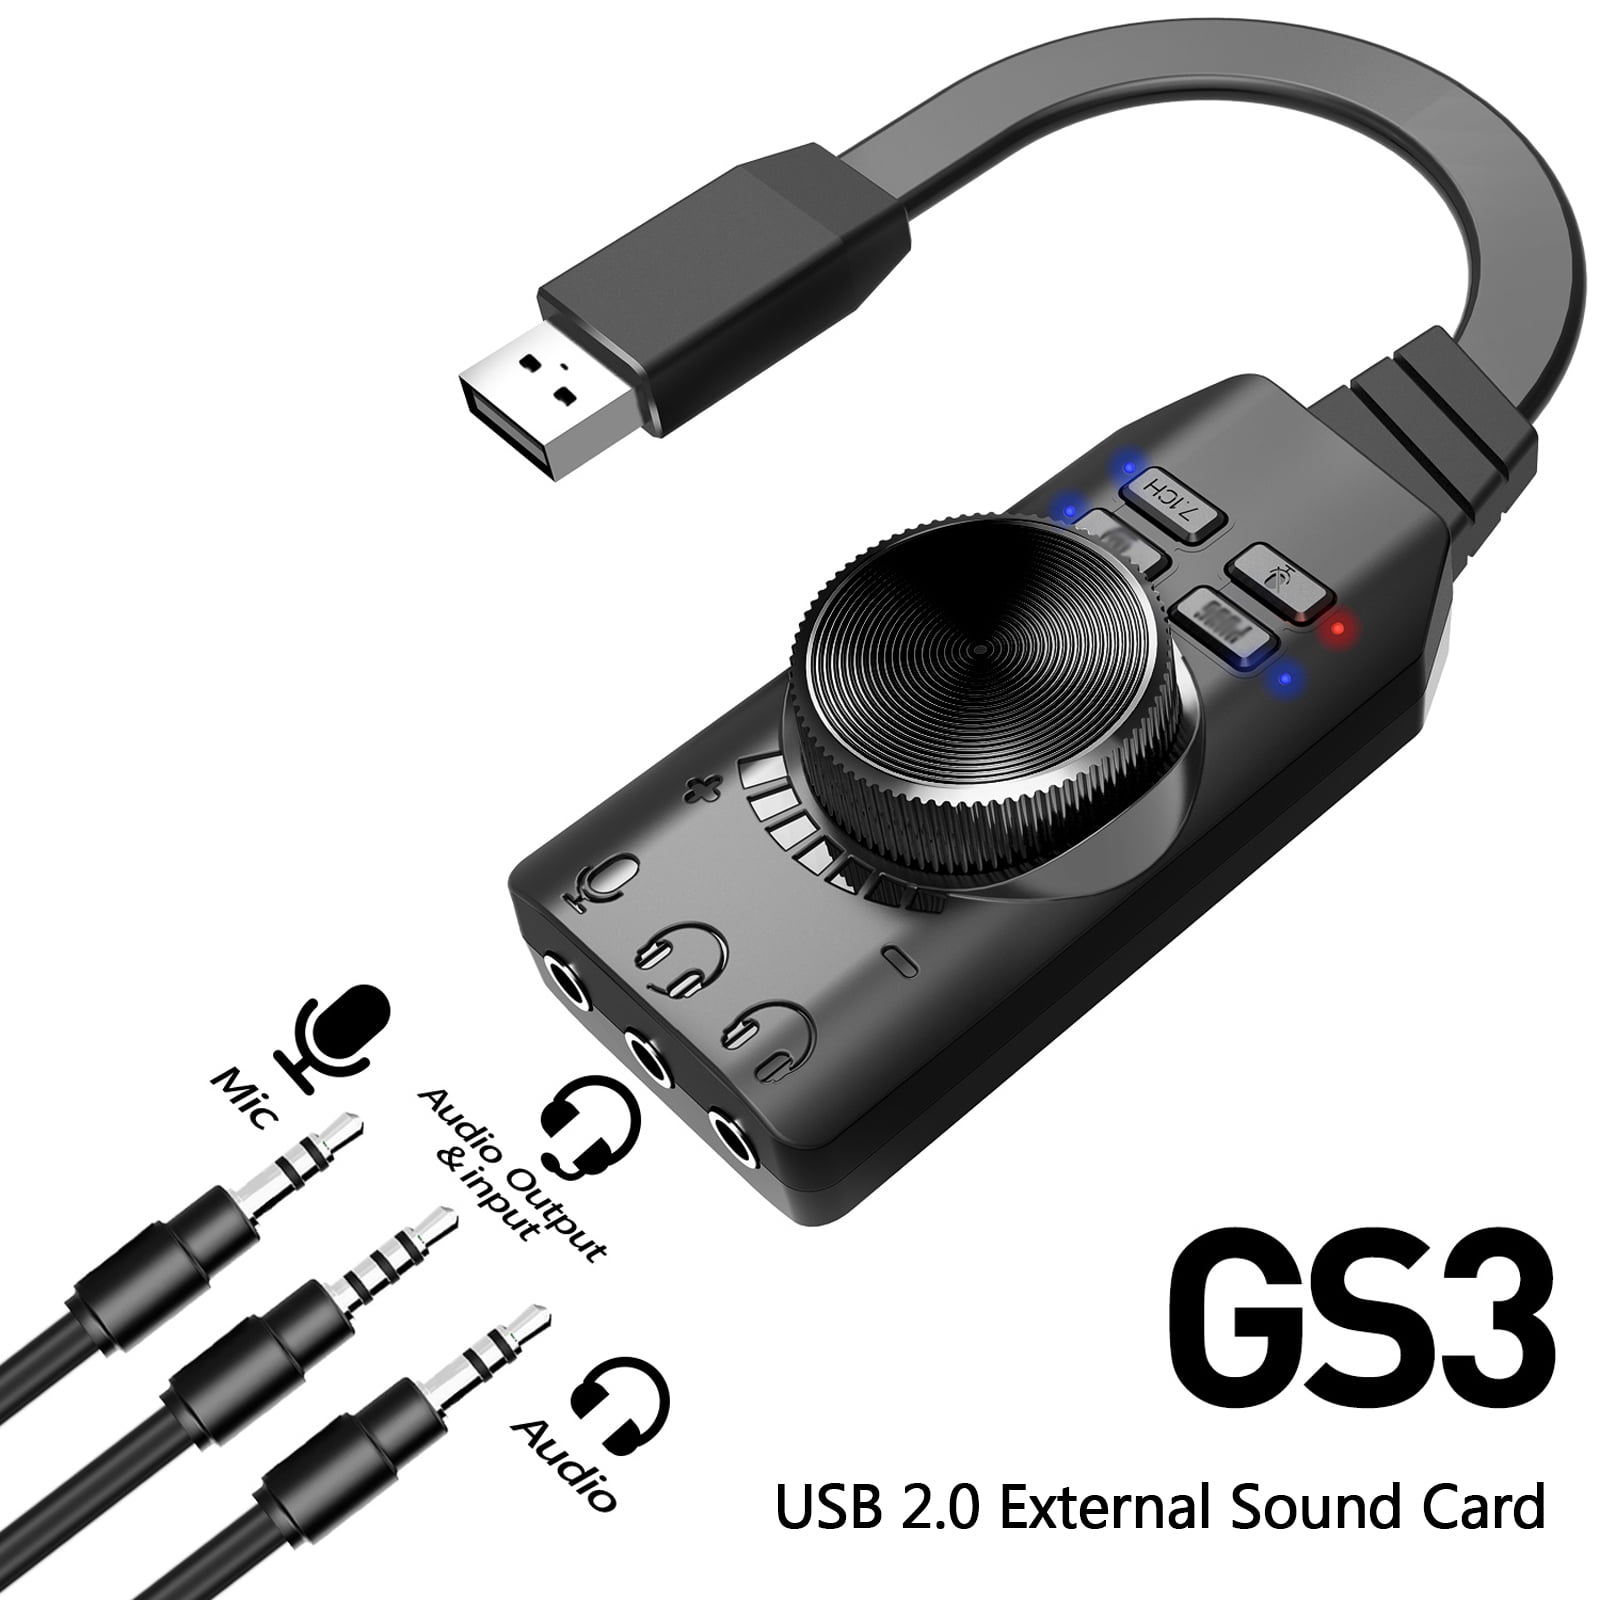 GS3 USB 2.0 External Sound Card Virtual 7.1 Channel Sound Card Adapter Plug and Play with Headphone Microphone Jacks Volume Control Mute Mic Games Sound Effect Upgrade Version for Desktop Laptop PC